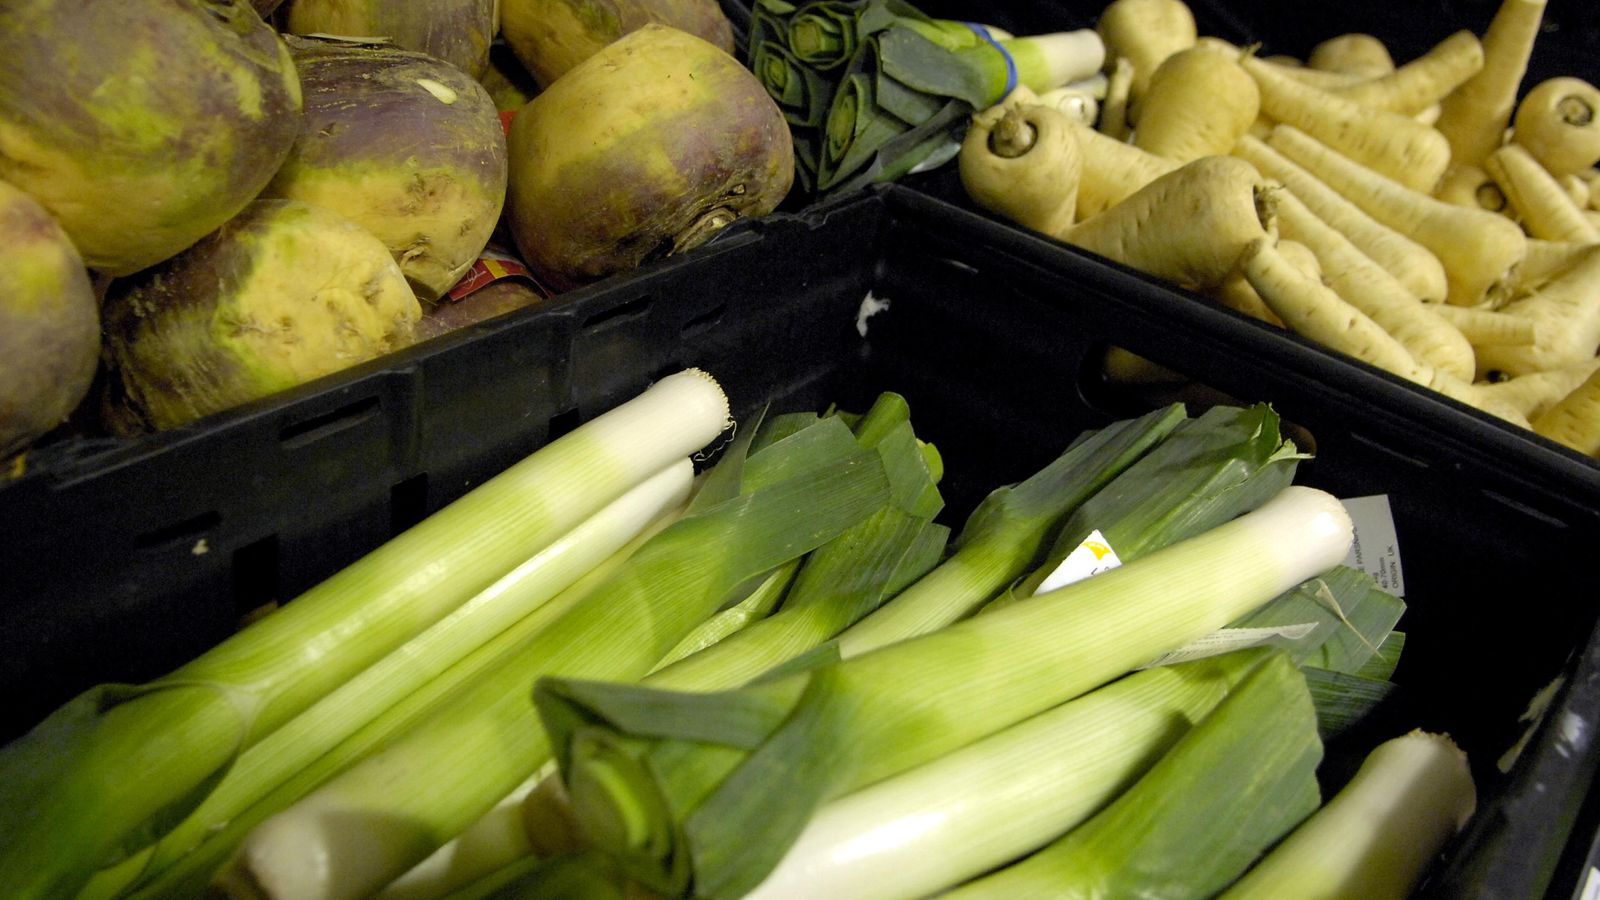 Food shortages: British leek supplies 'exhausted by April' in latest warning